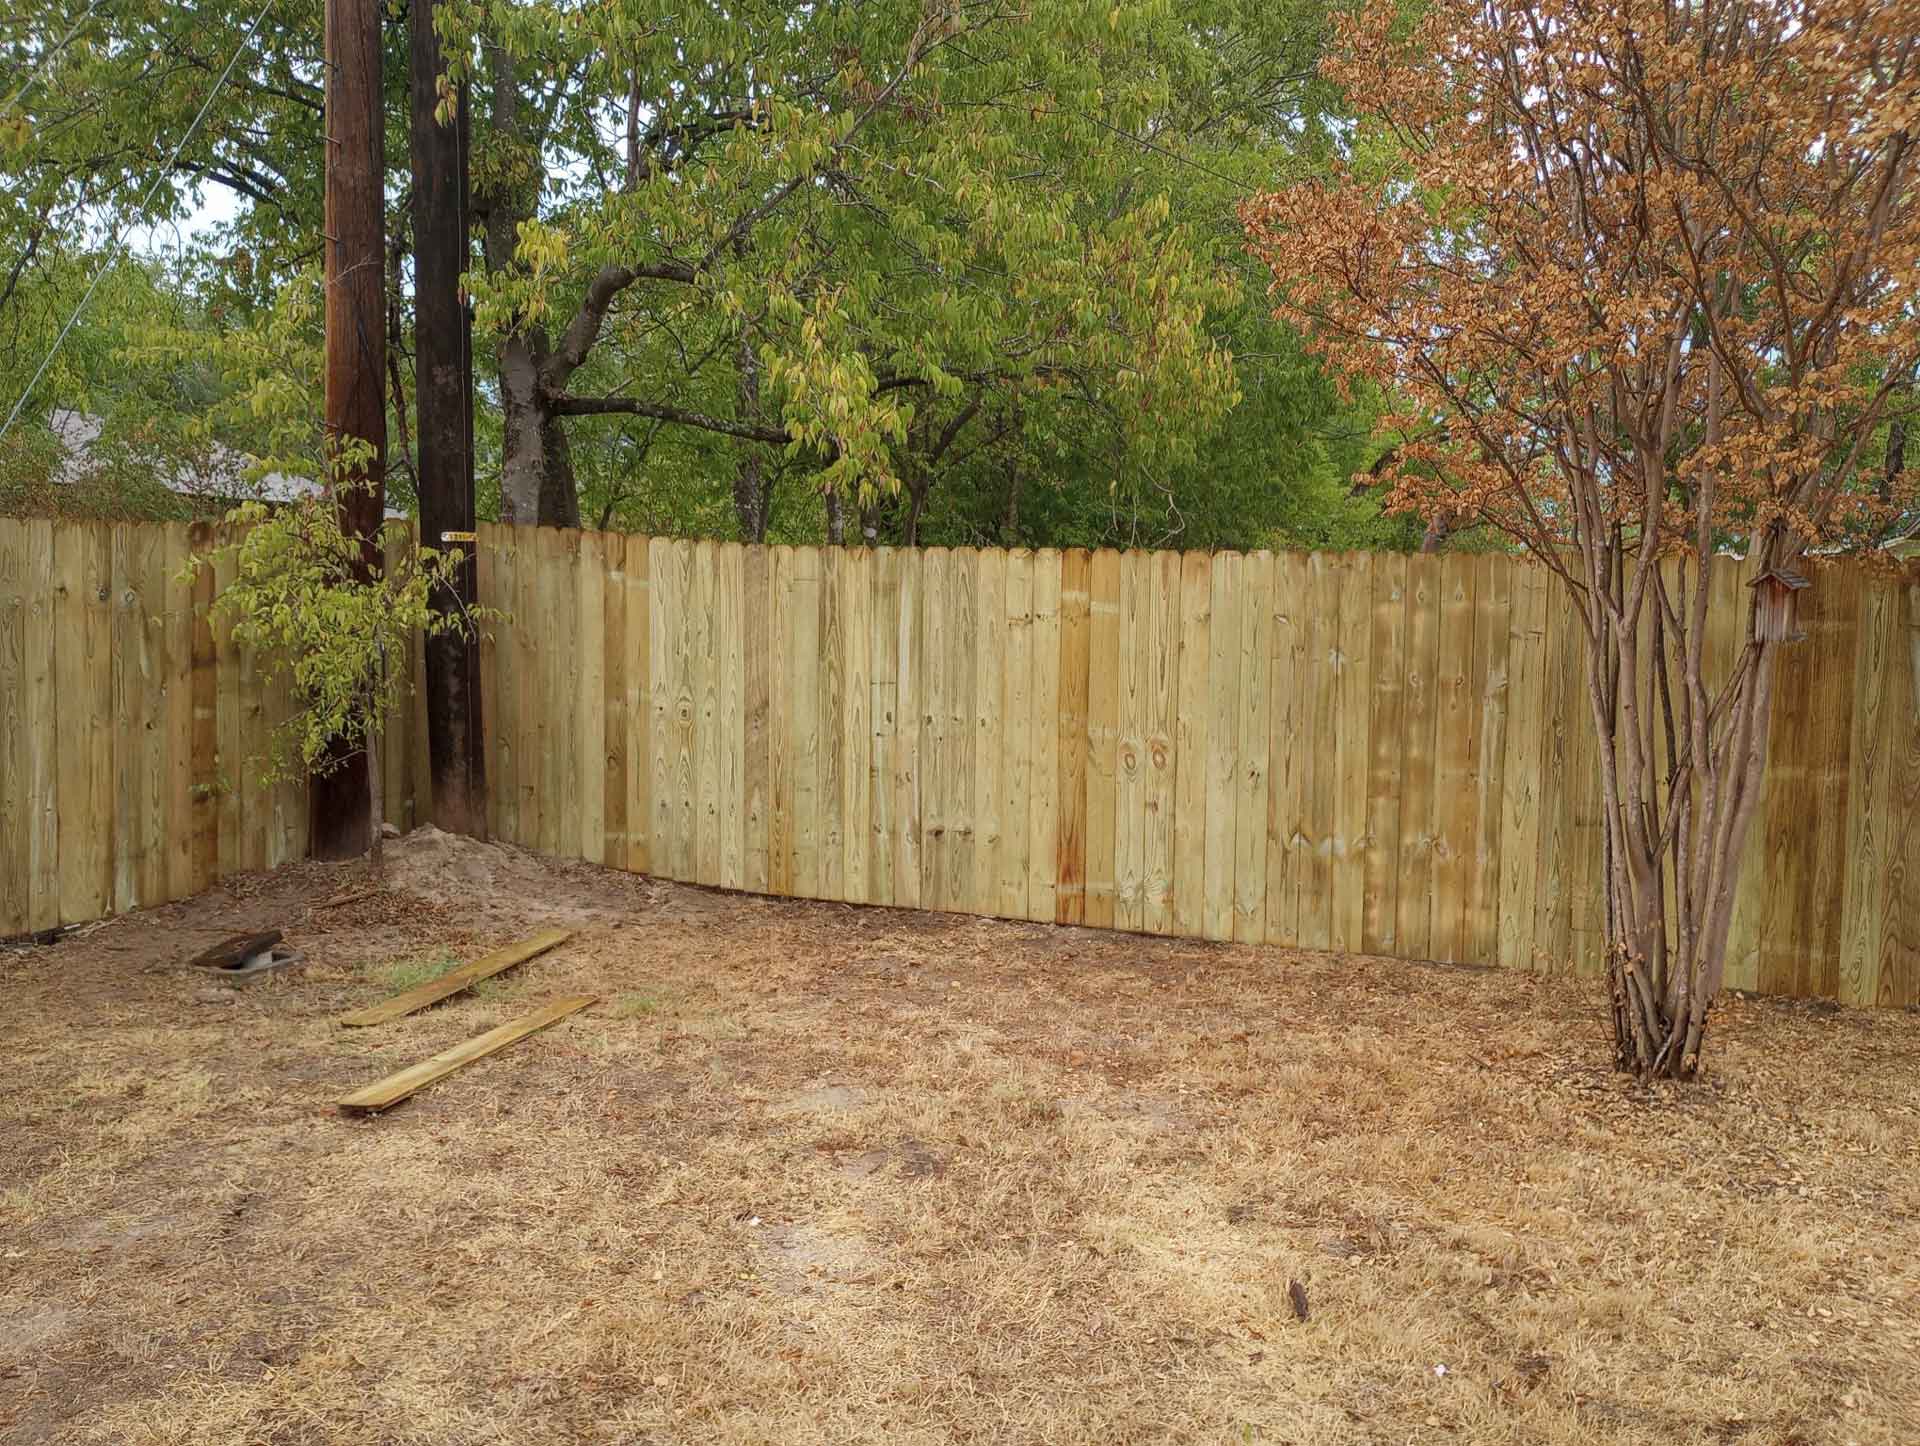 A wooden fence in a backyard with some power lines